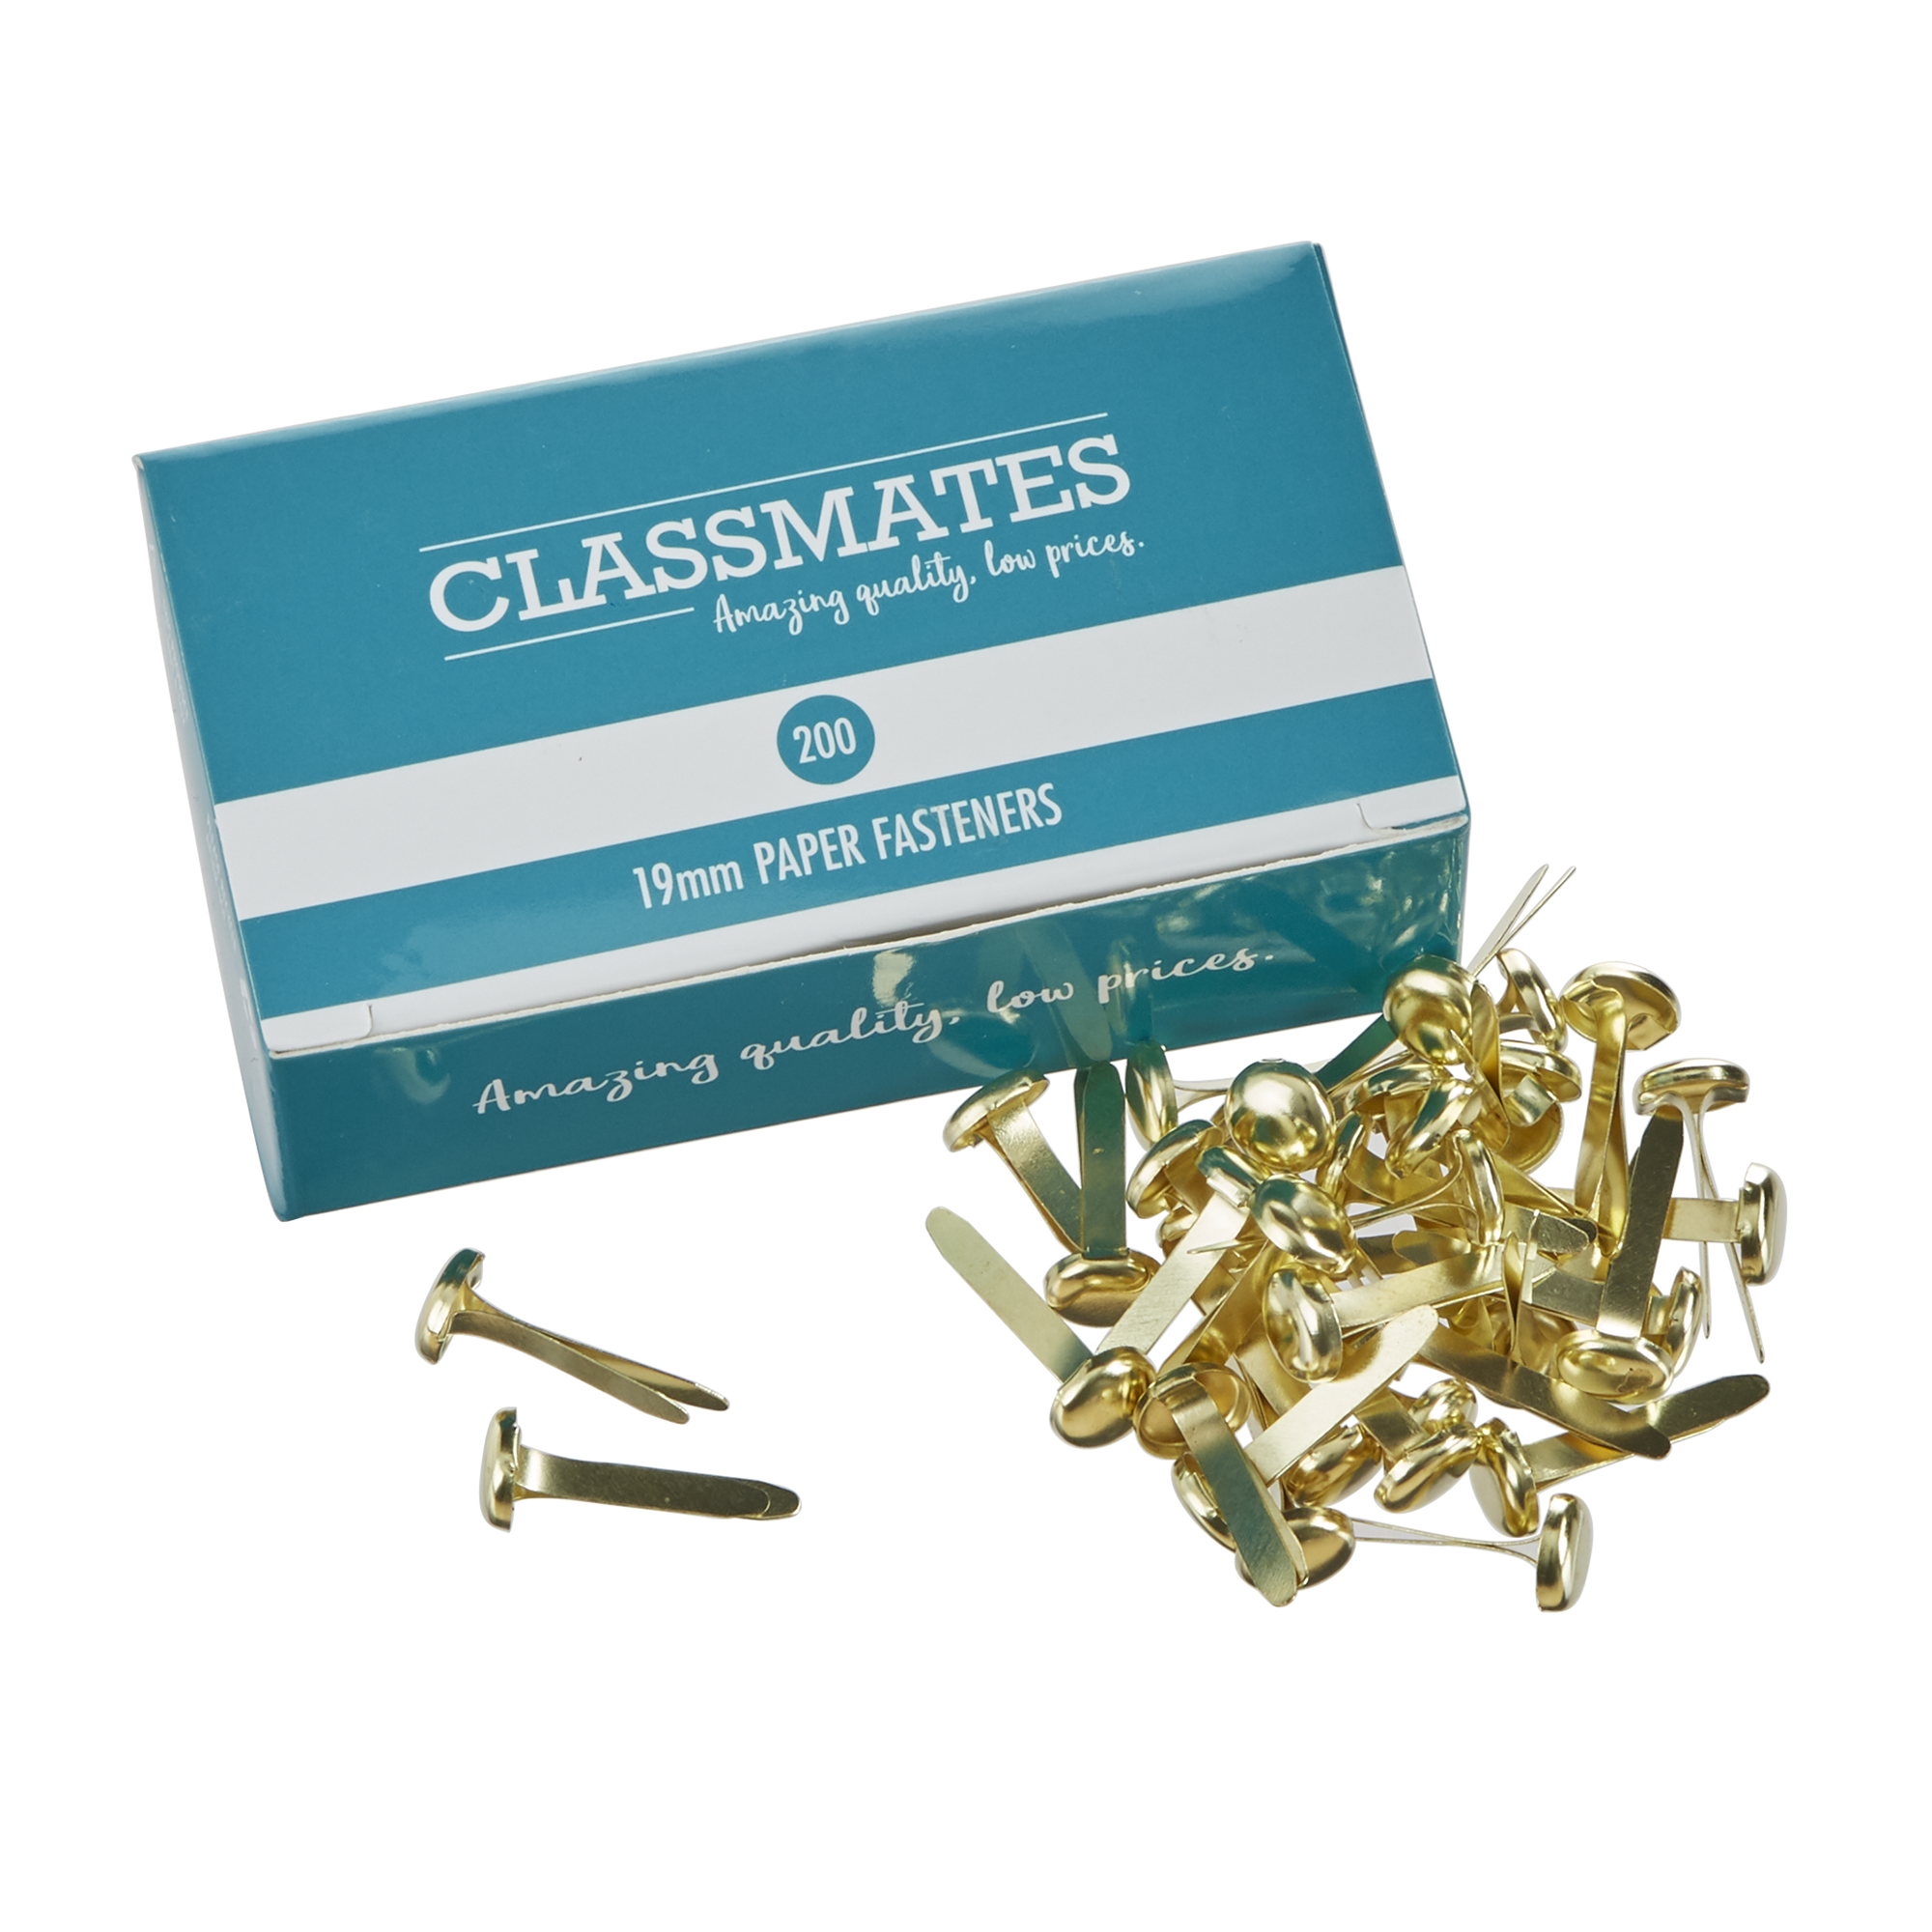 HE186543 - Classmates Paper Fasteners 20mm - Pack of 200 | Hope Education